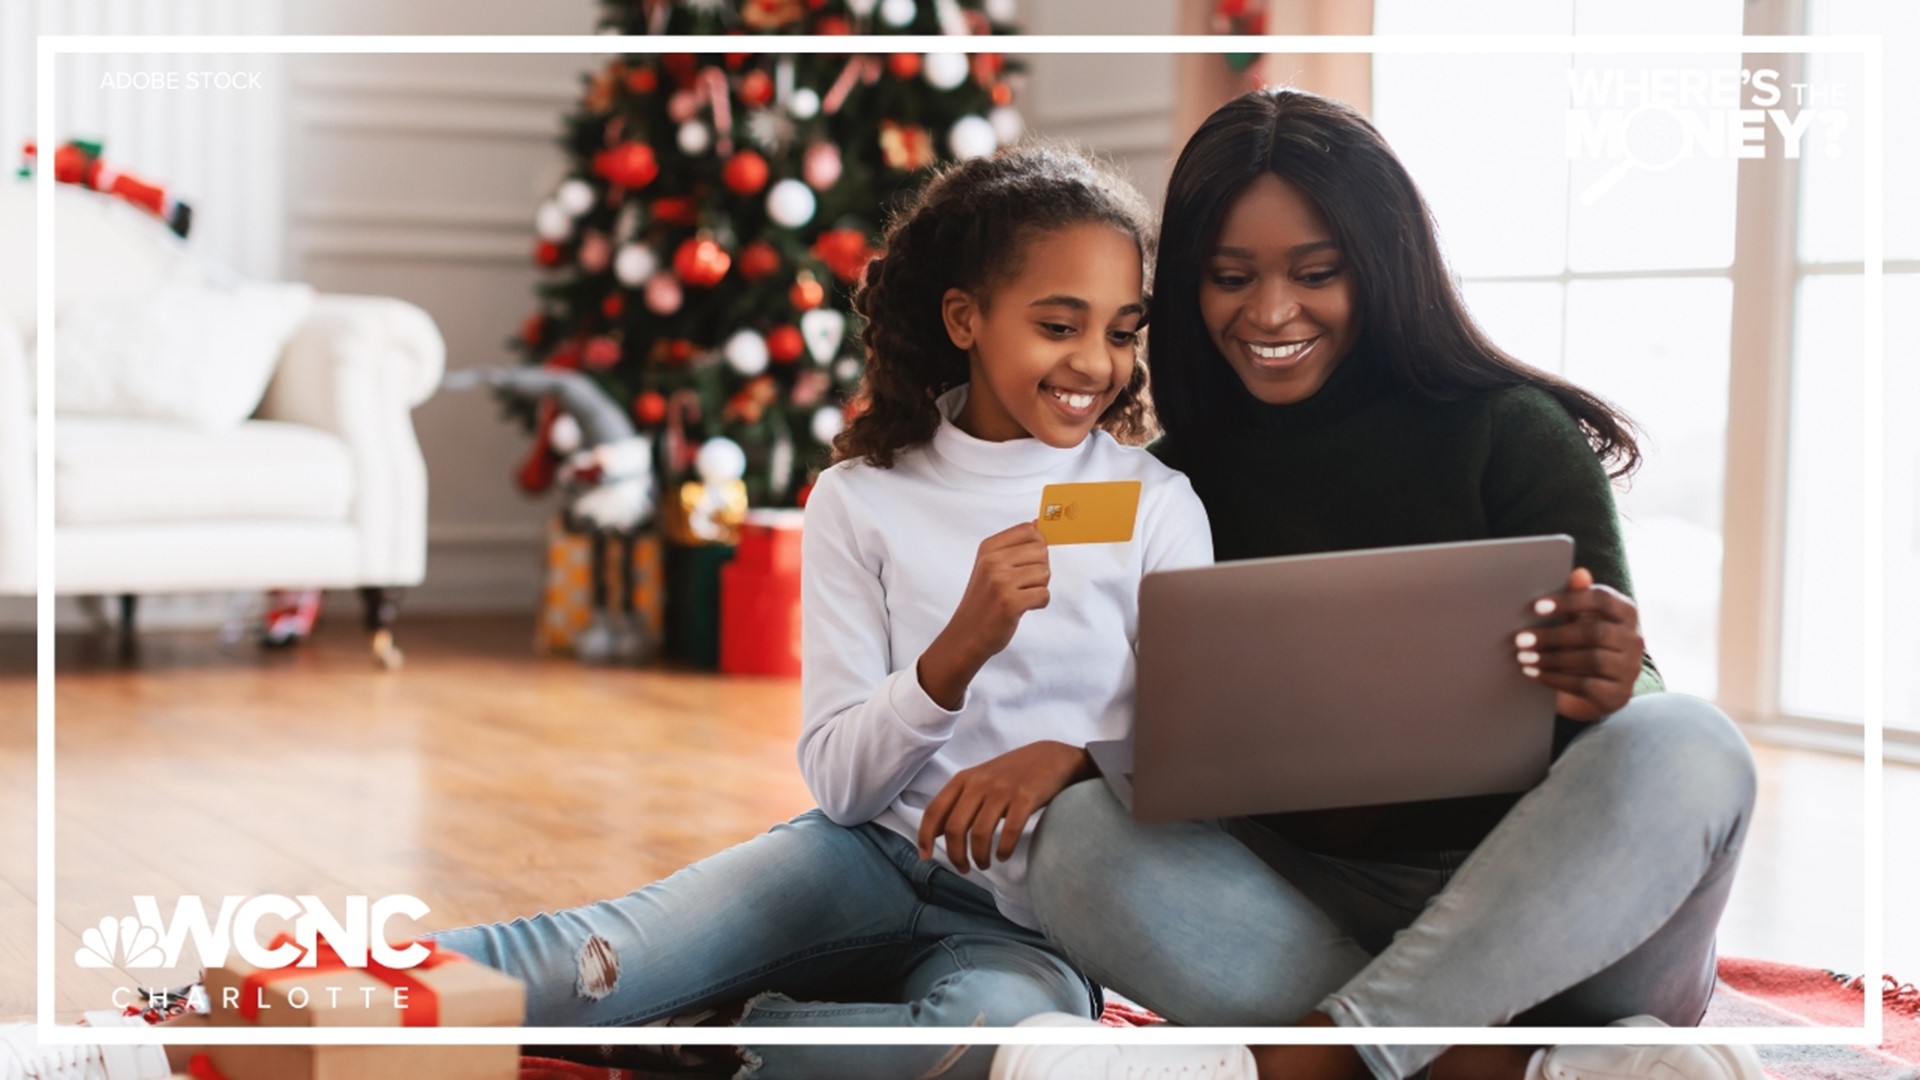 As people put the gift-giving holidays behind them, many families use the new year as a reset, with many taking the opportunity to start new habits like saving more.